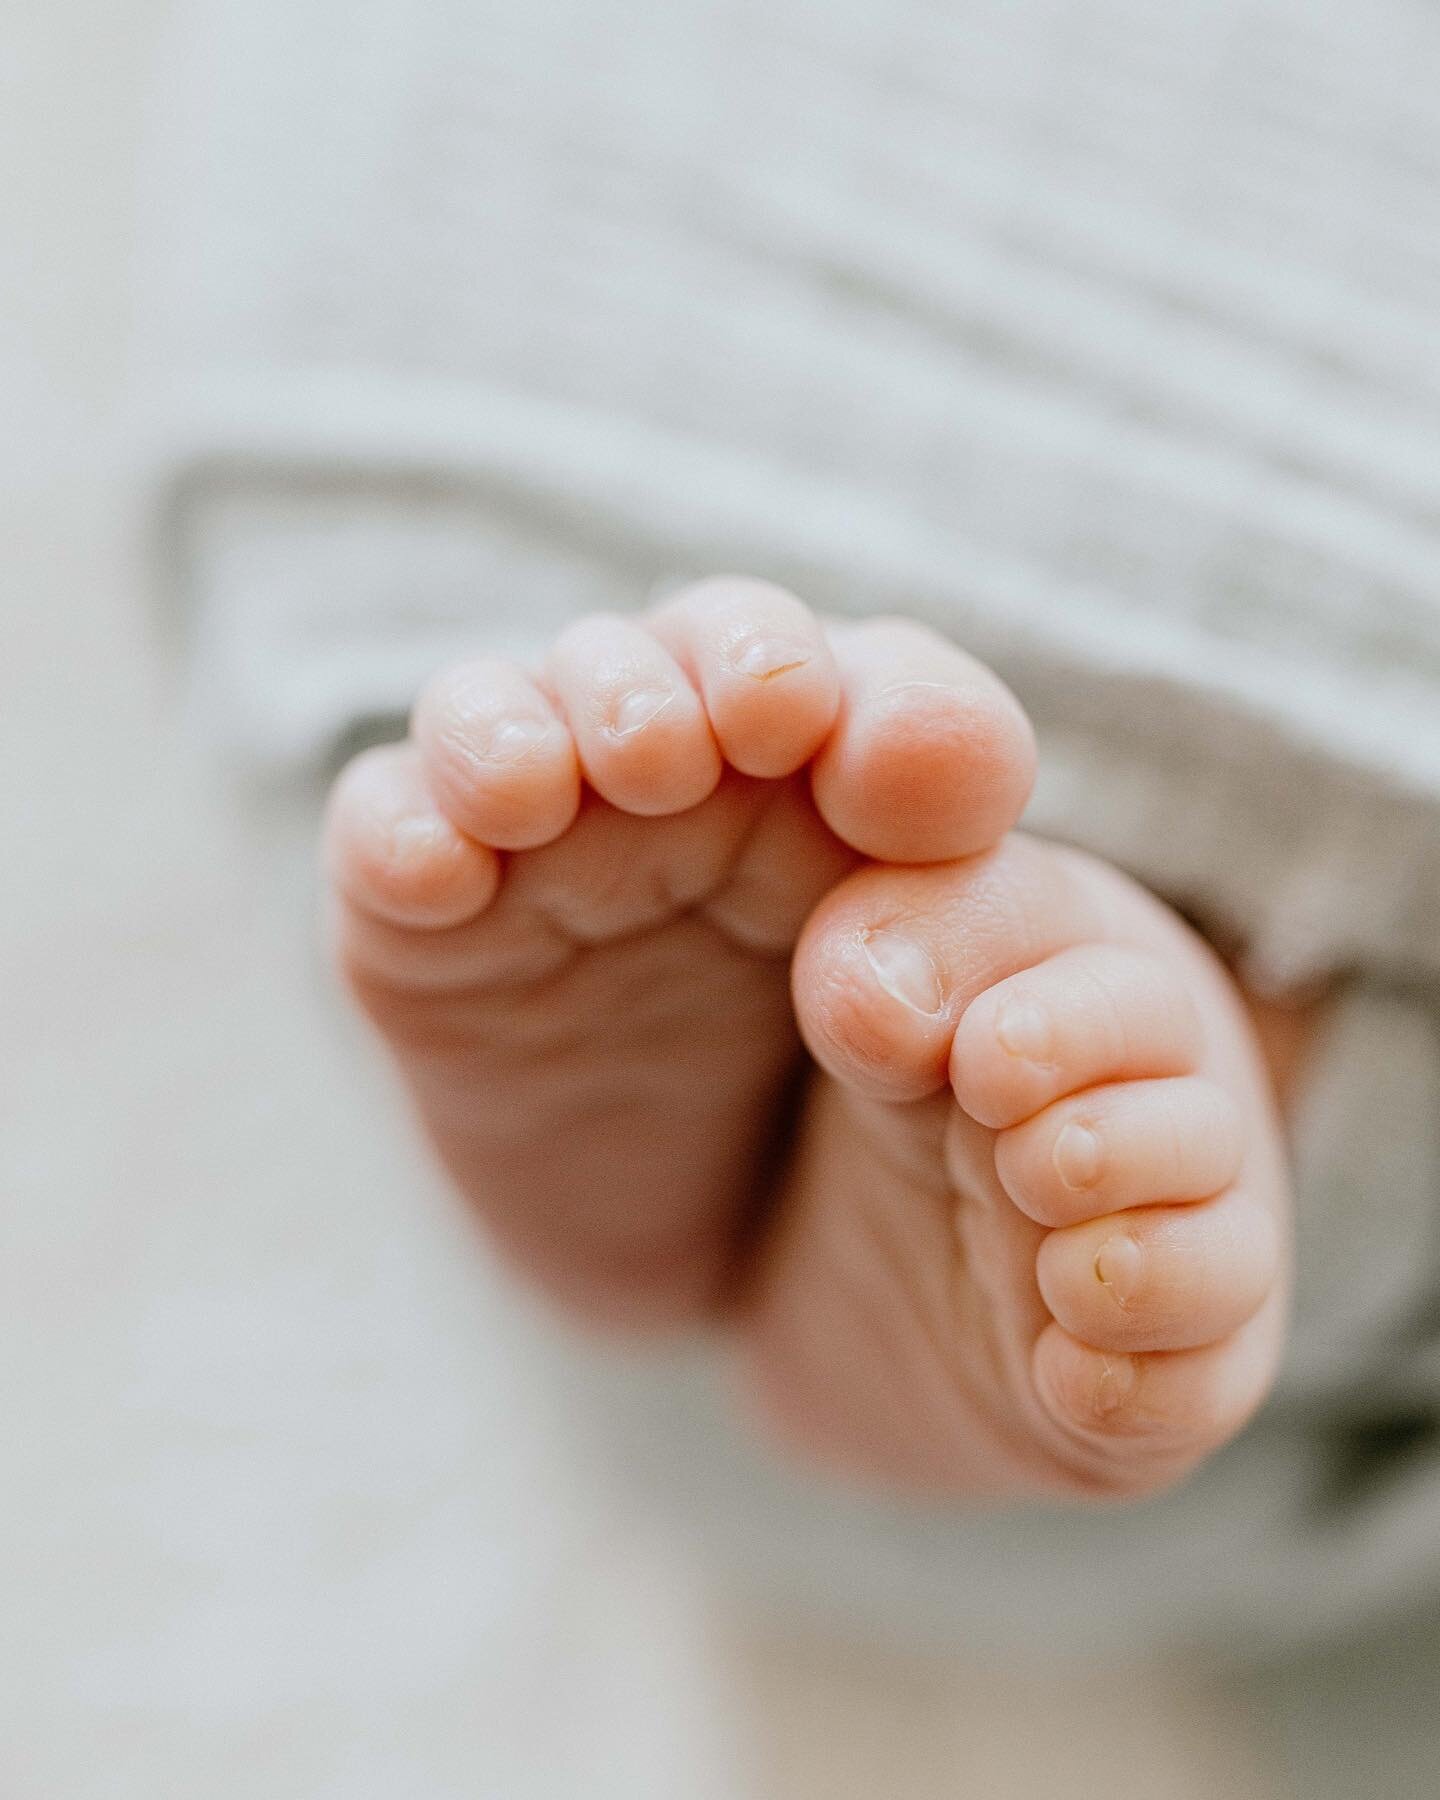 10 fingers and 10 toes 🥲 I love including detail shots like these to each newborn gallery